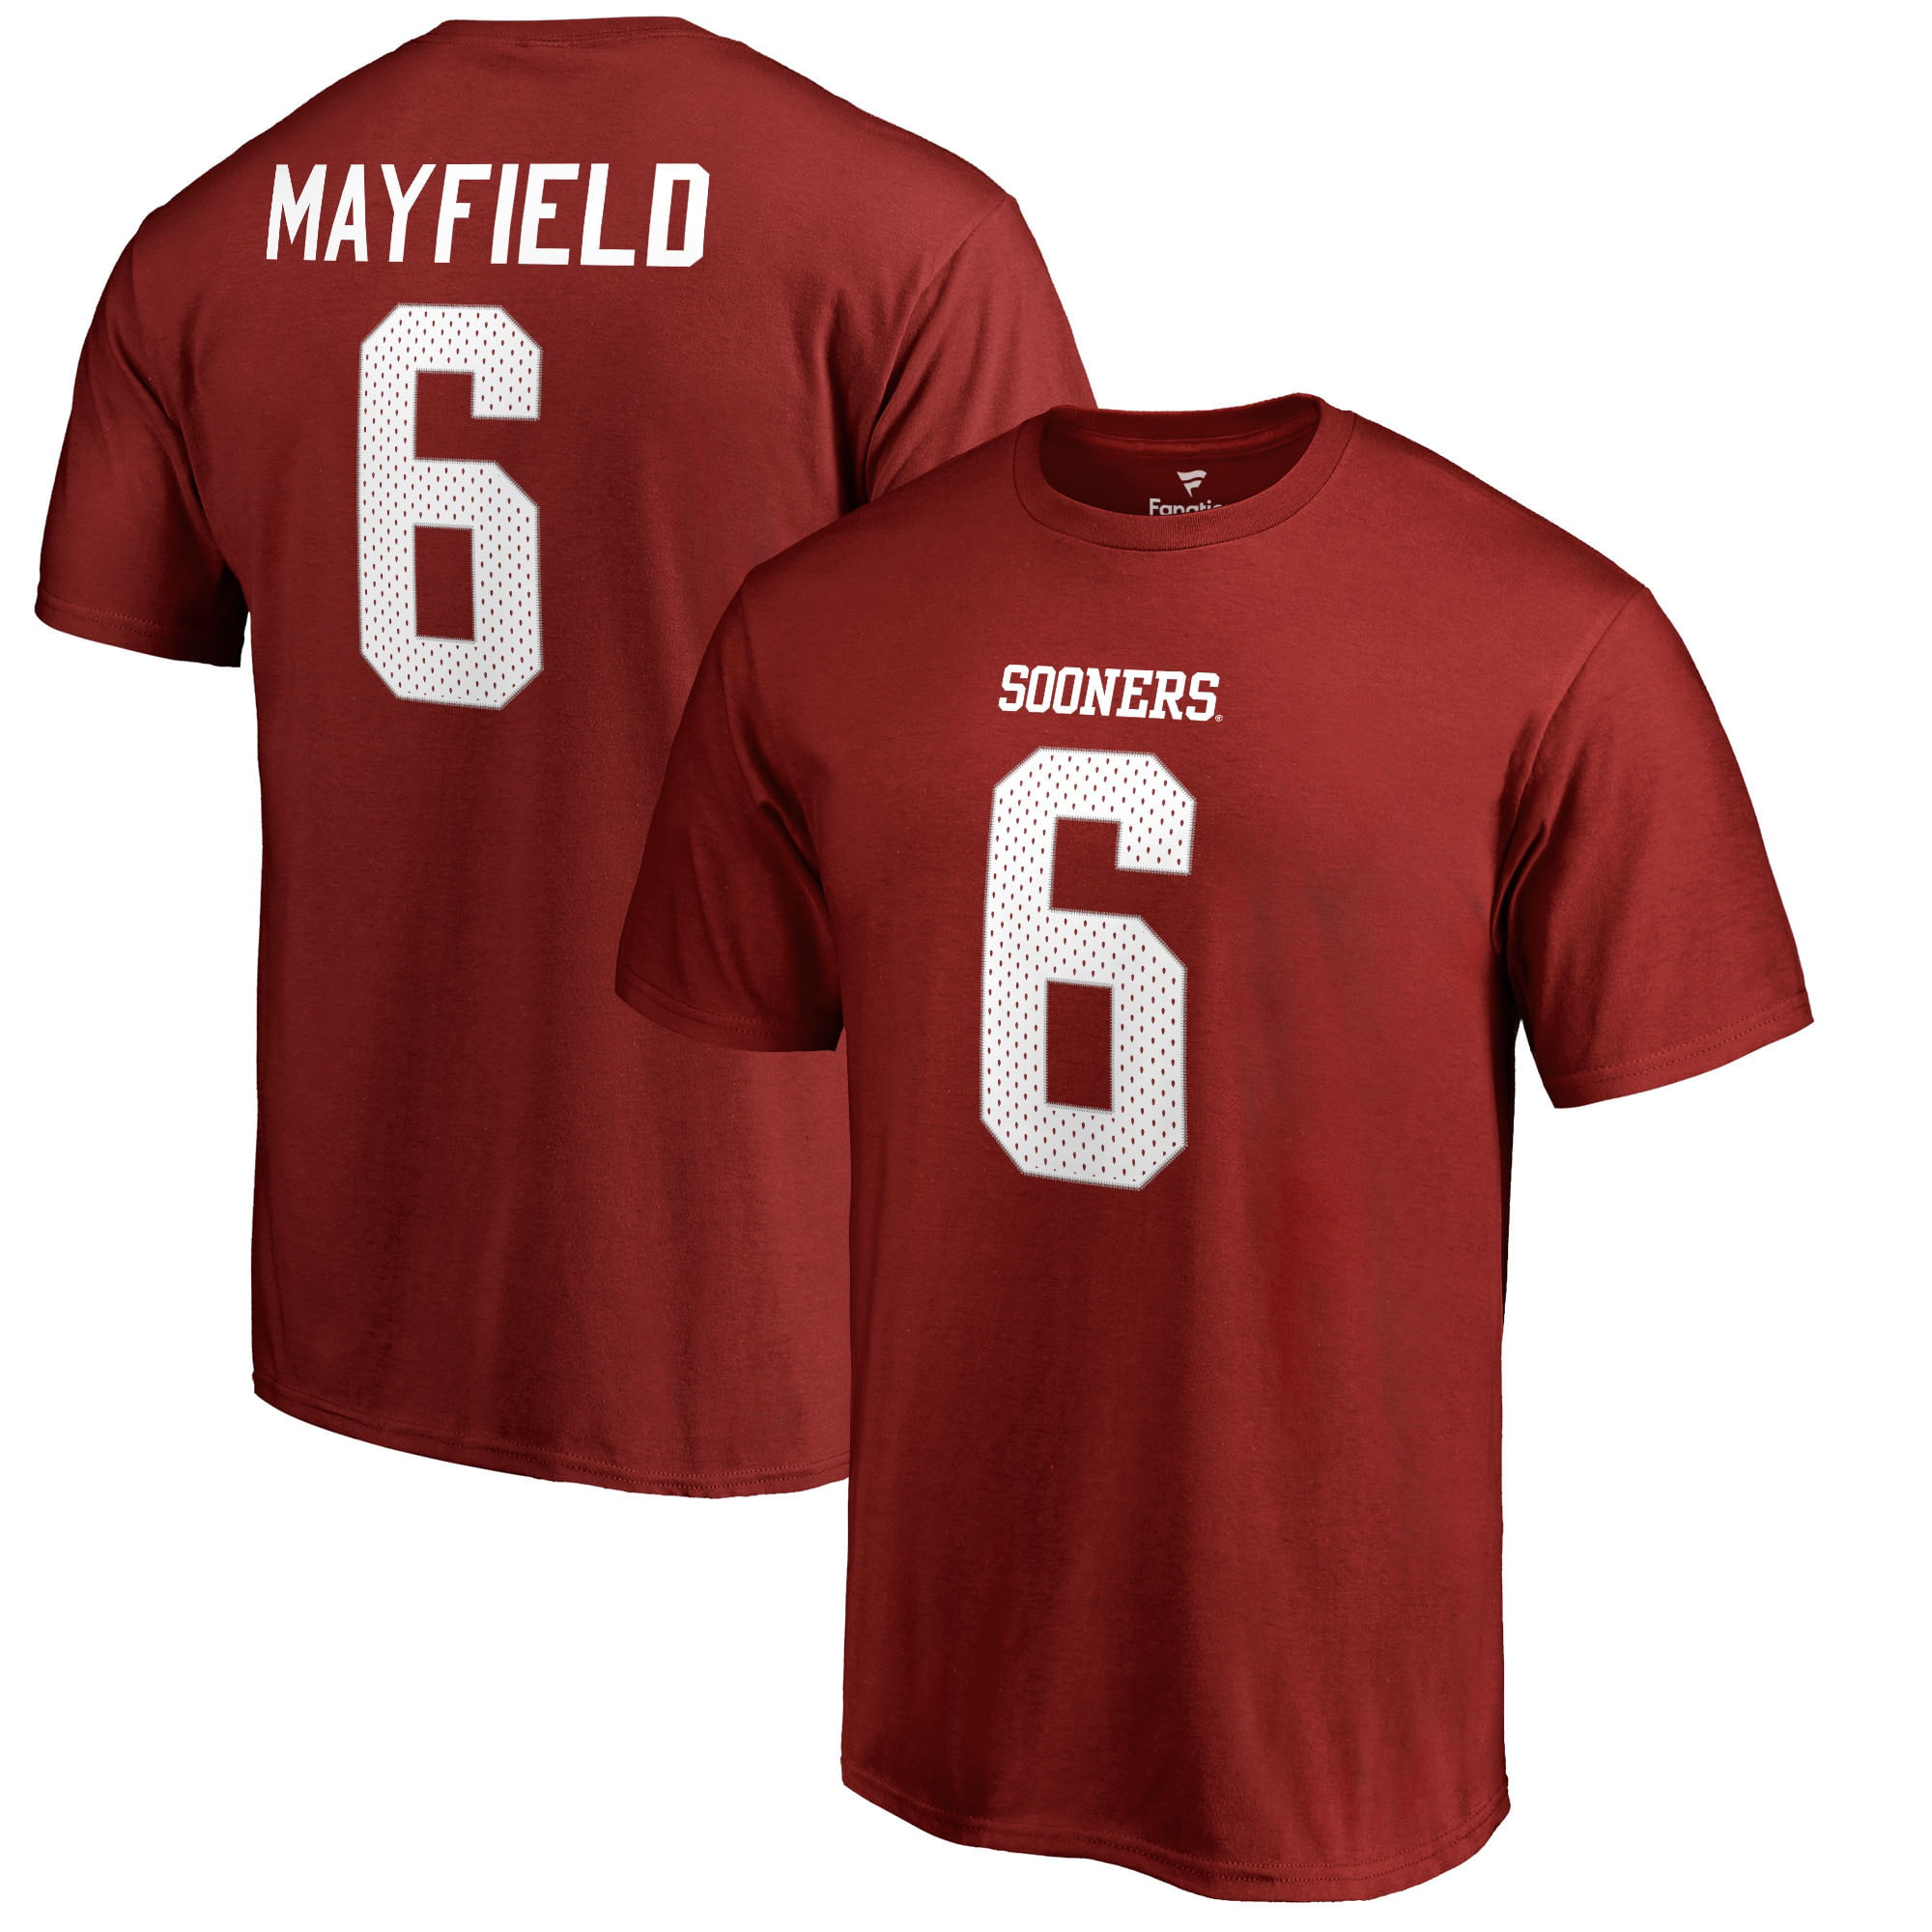 baker mayfield king of the north t shirt